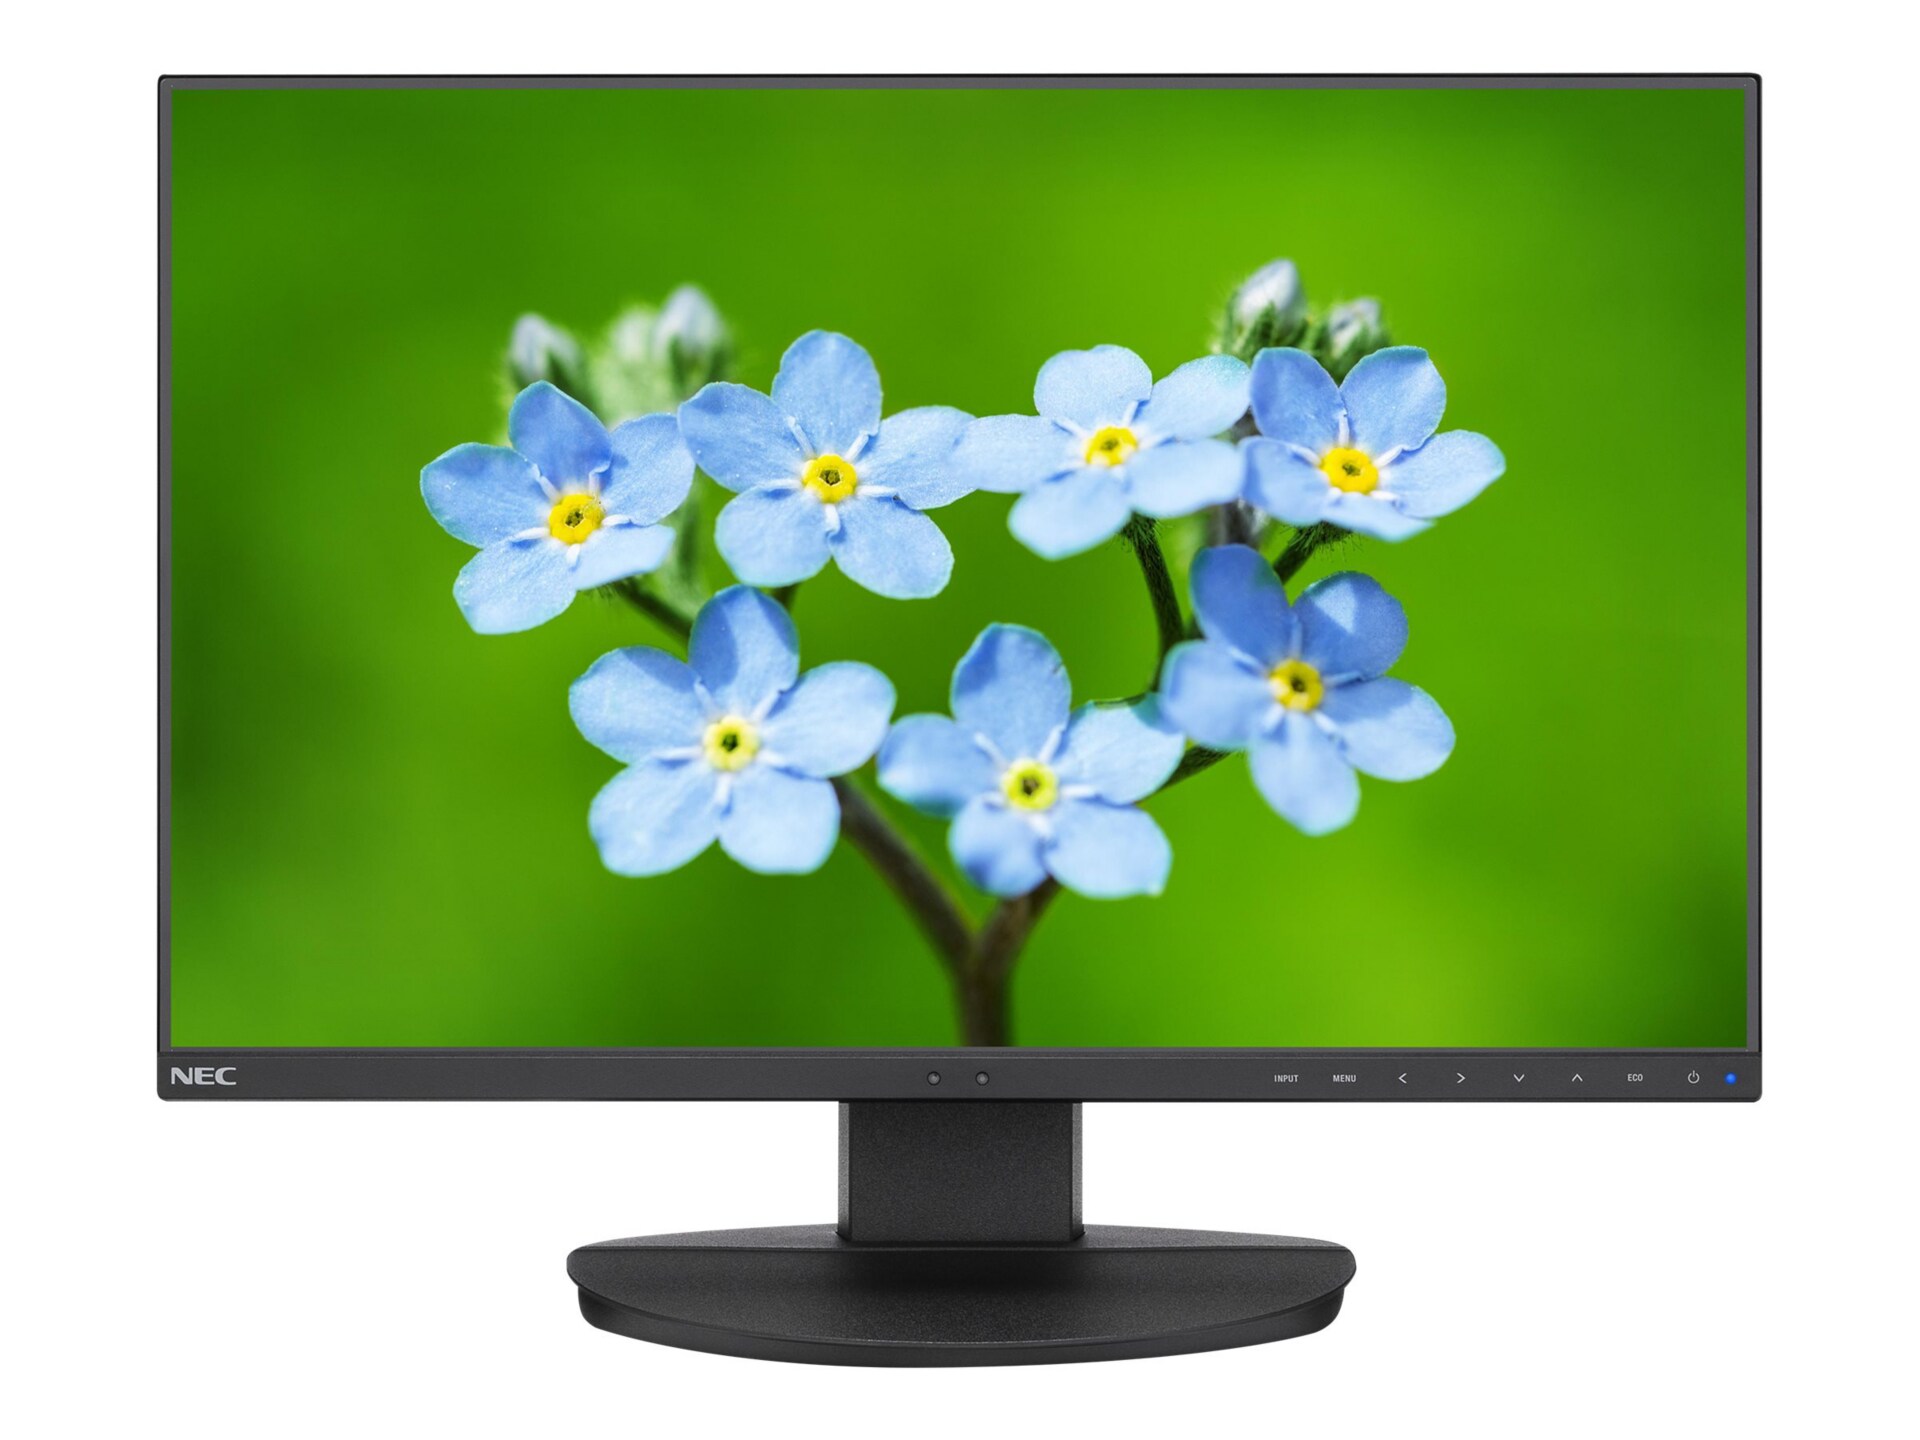 NEC MultiSync EA231WU-BK-SV - LED monitor - 23" - with SpectraViewII Color